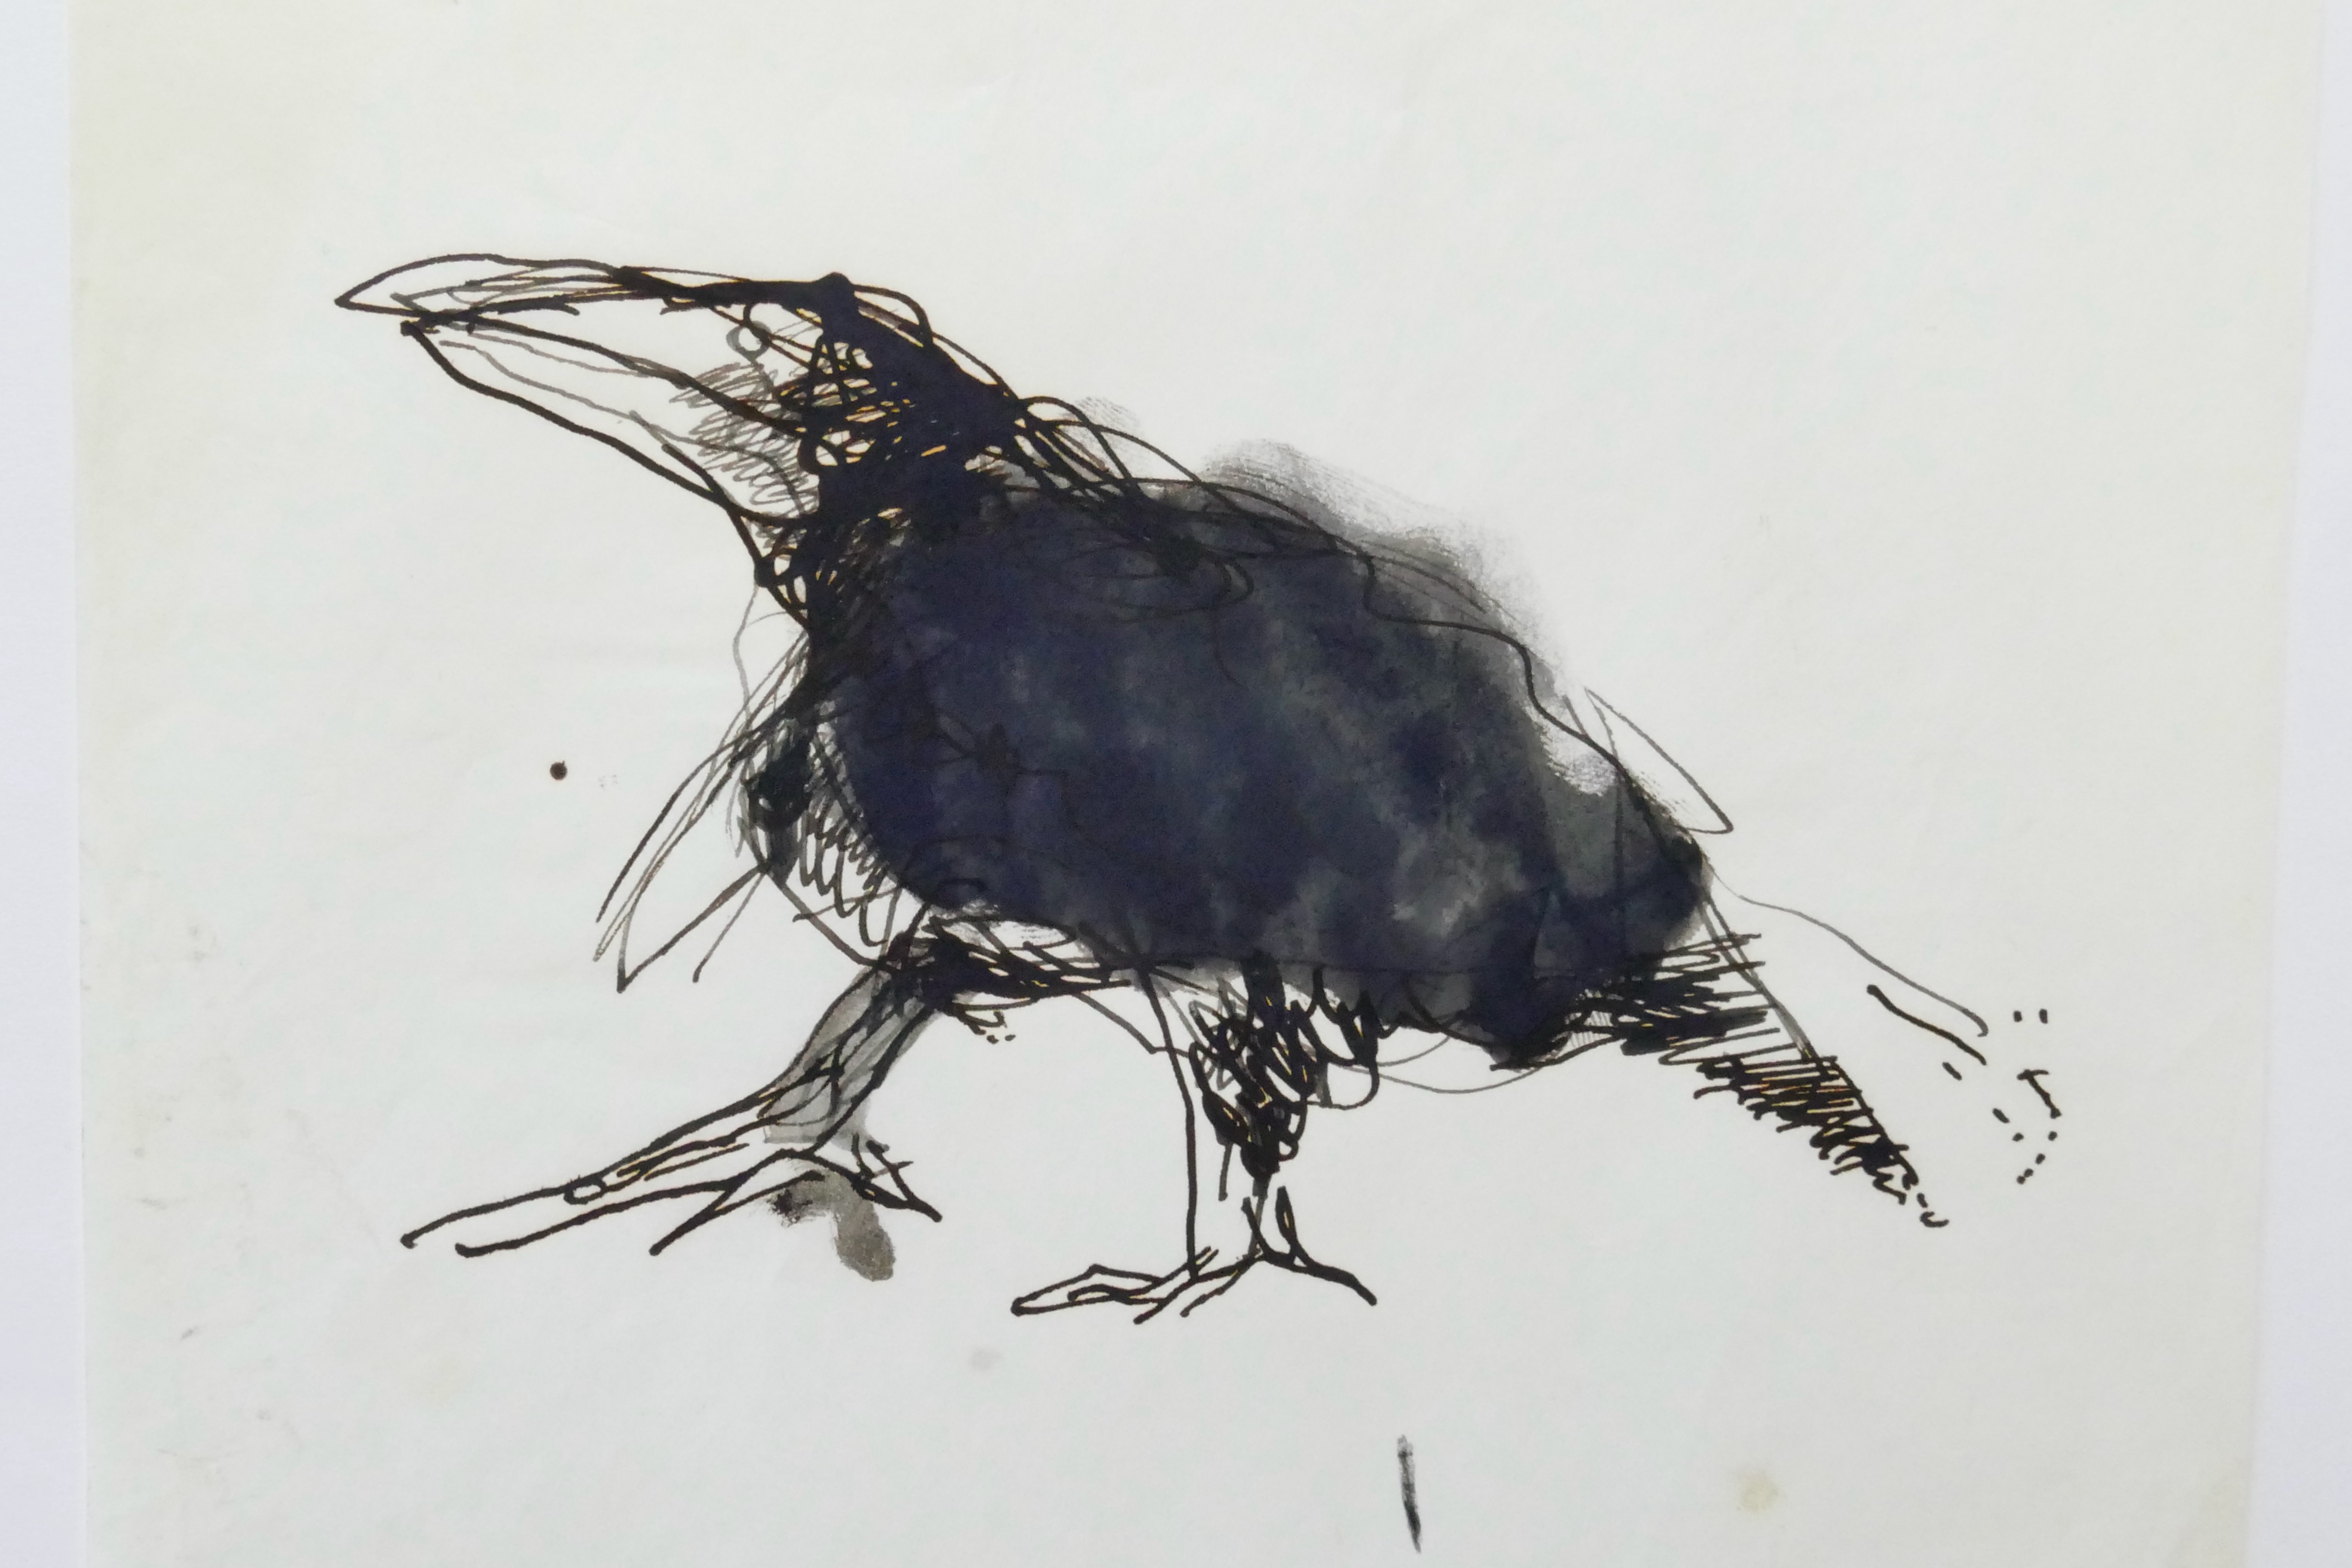 Crow by Barrie Cooke. Reproduced with the permission of The Barrie Cooke Estate